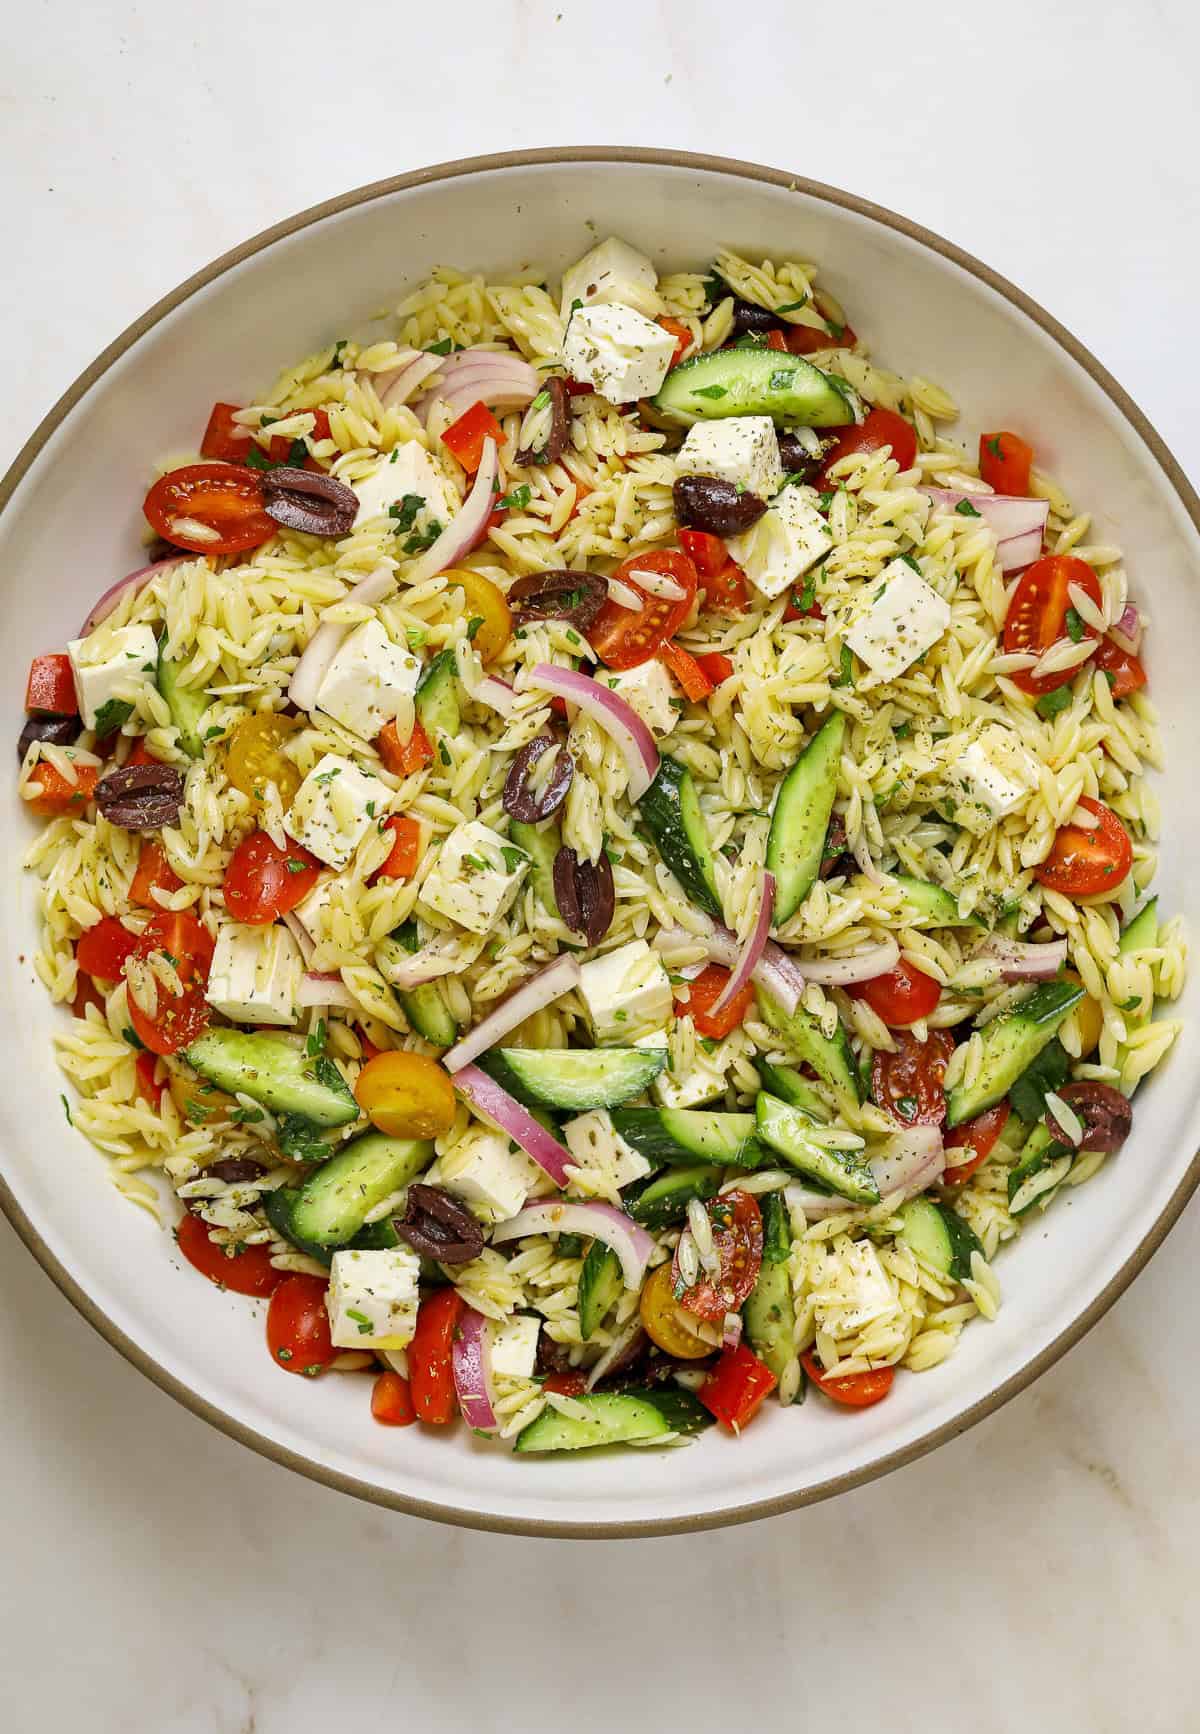 A large, white ceramic bowl filled with orzo salad.